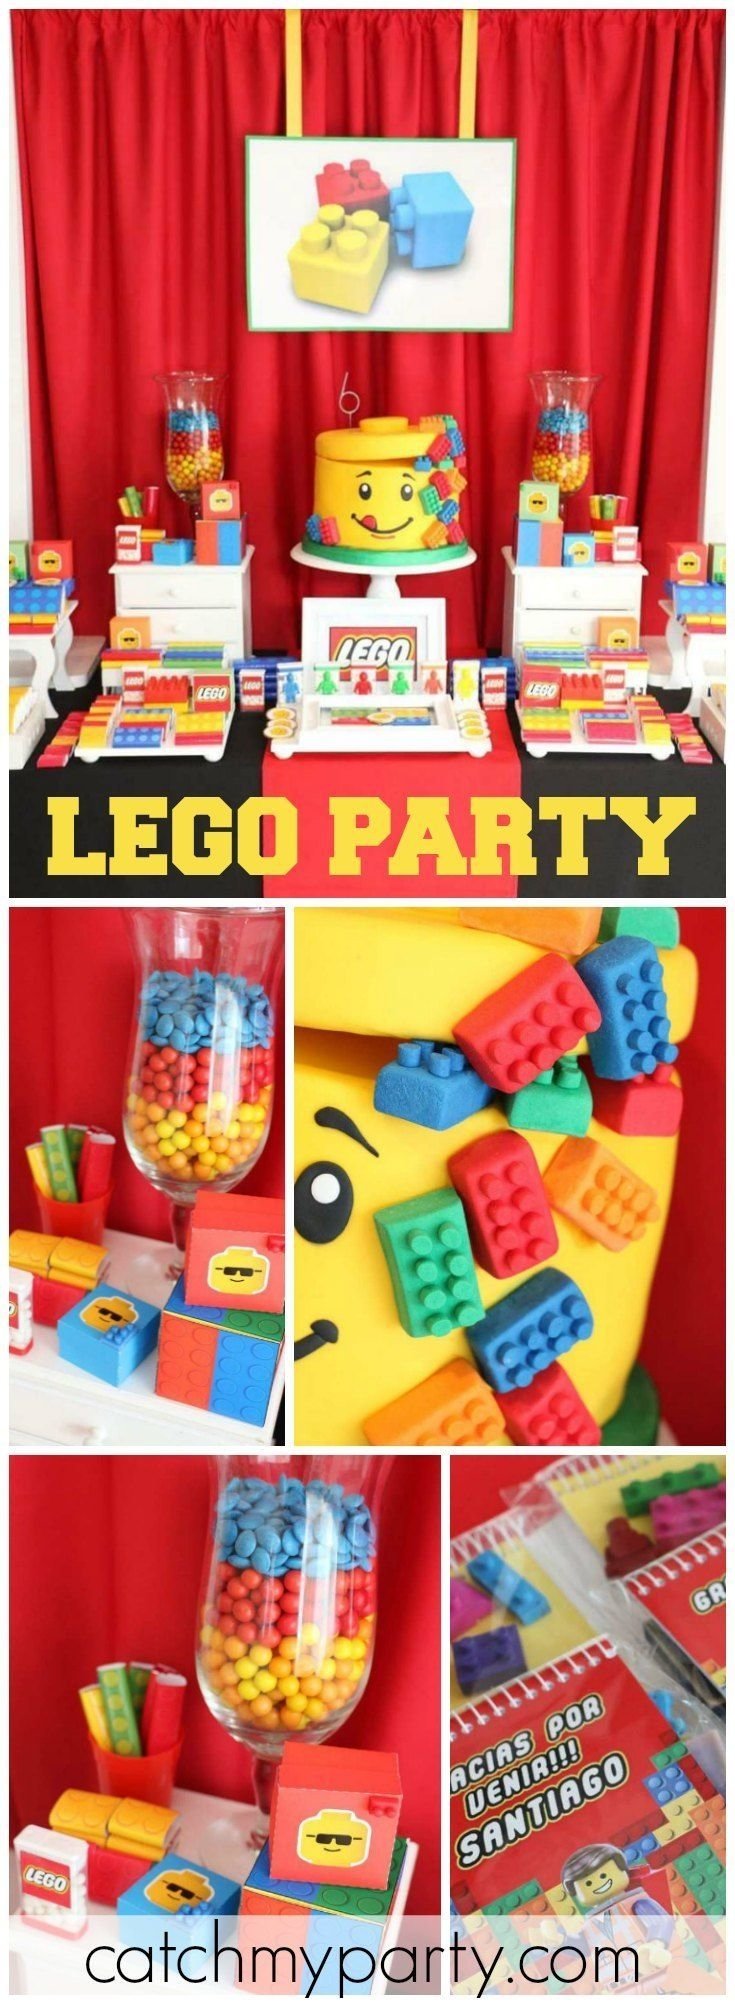 10 Awesome Birthday Ideas For A 5 Year Old Boy legos birthday lego movie party lego man cake man cake and 2022